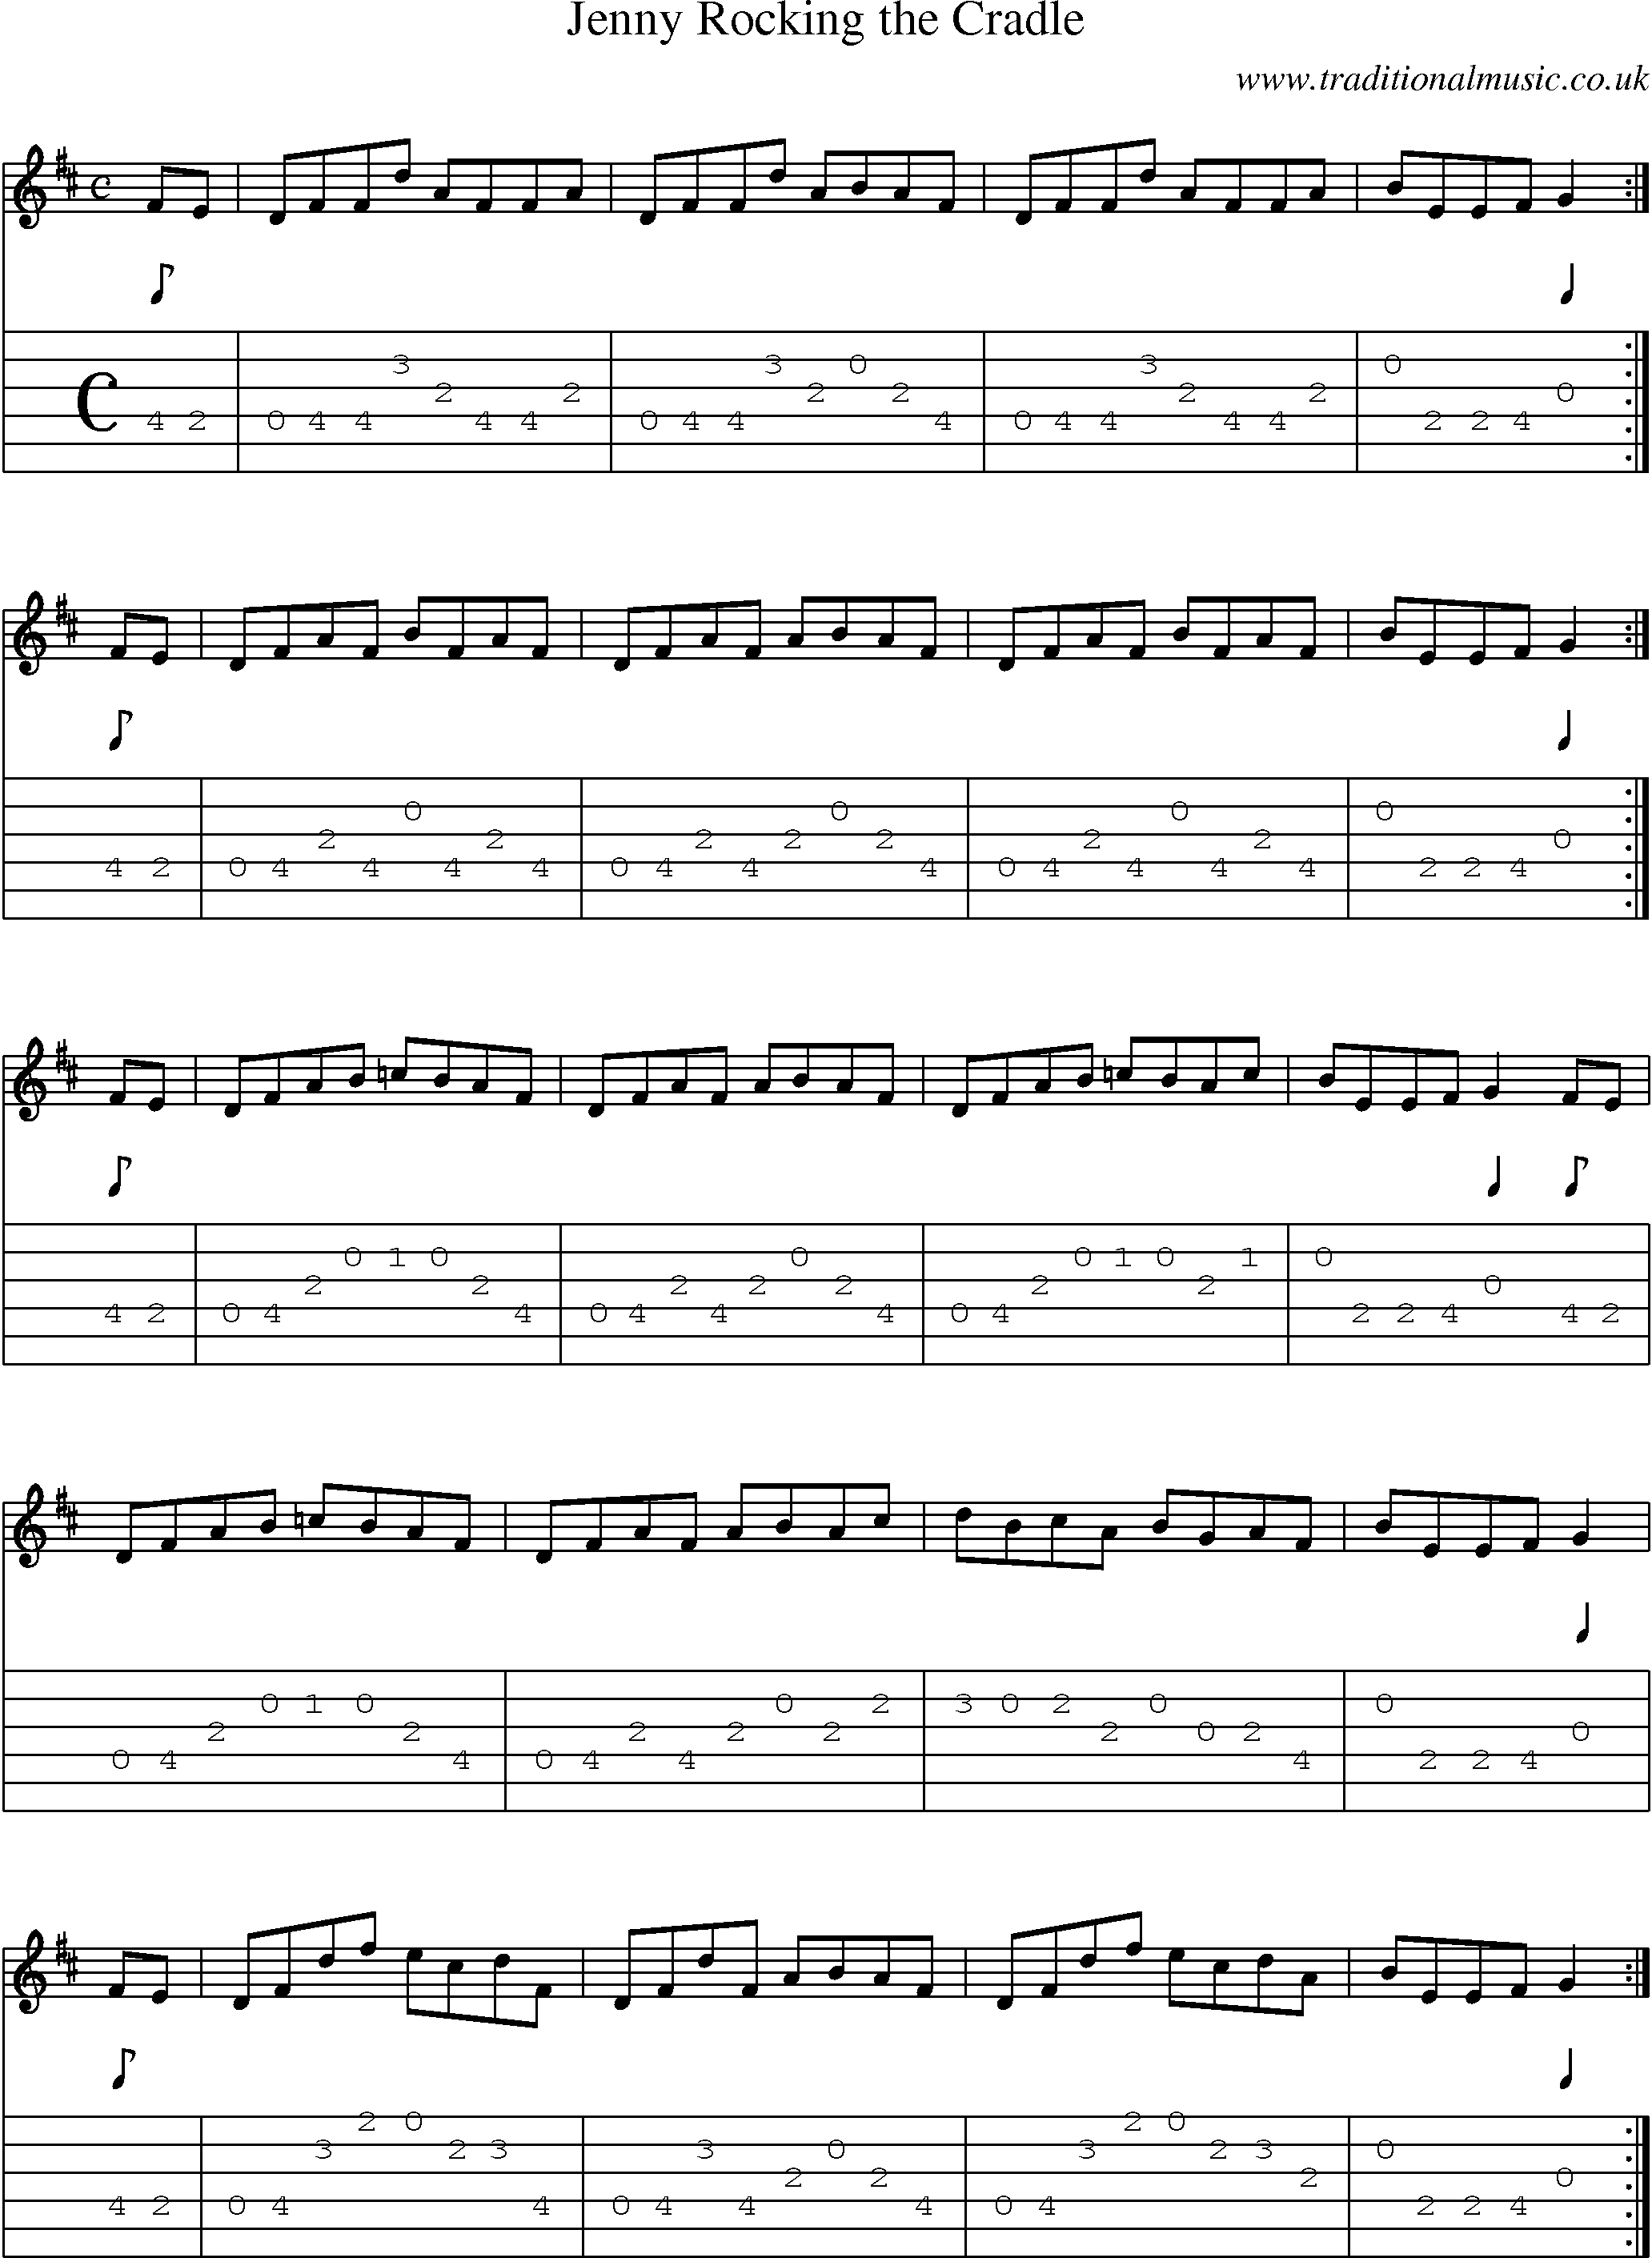 Music Score and Guitar Tabs for Jenny Rocking Cradle